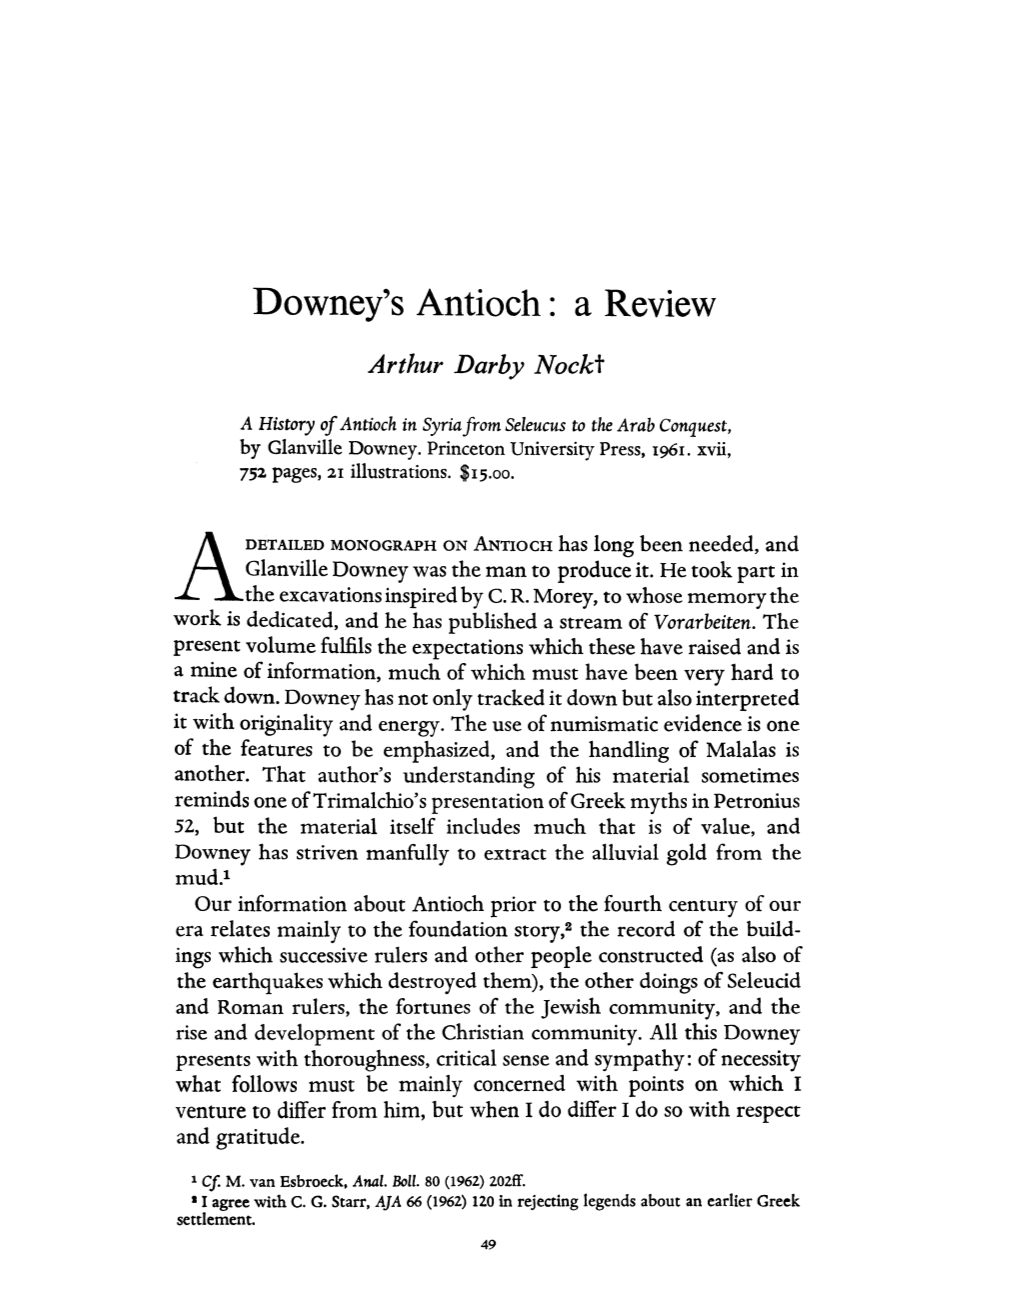 Downey's Antioch: a Review